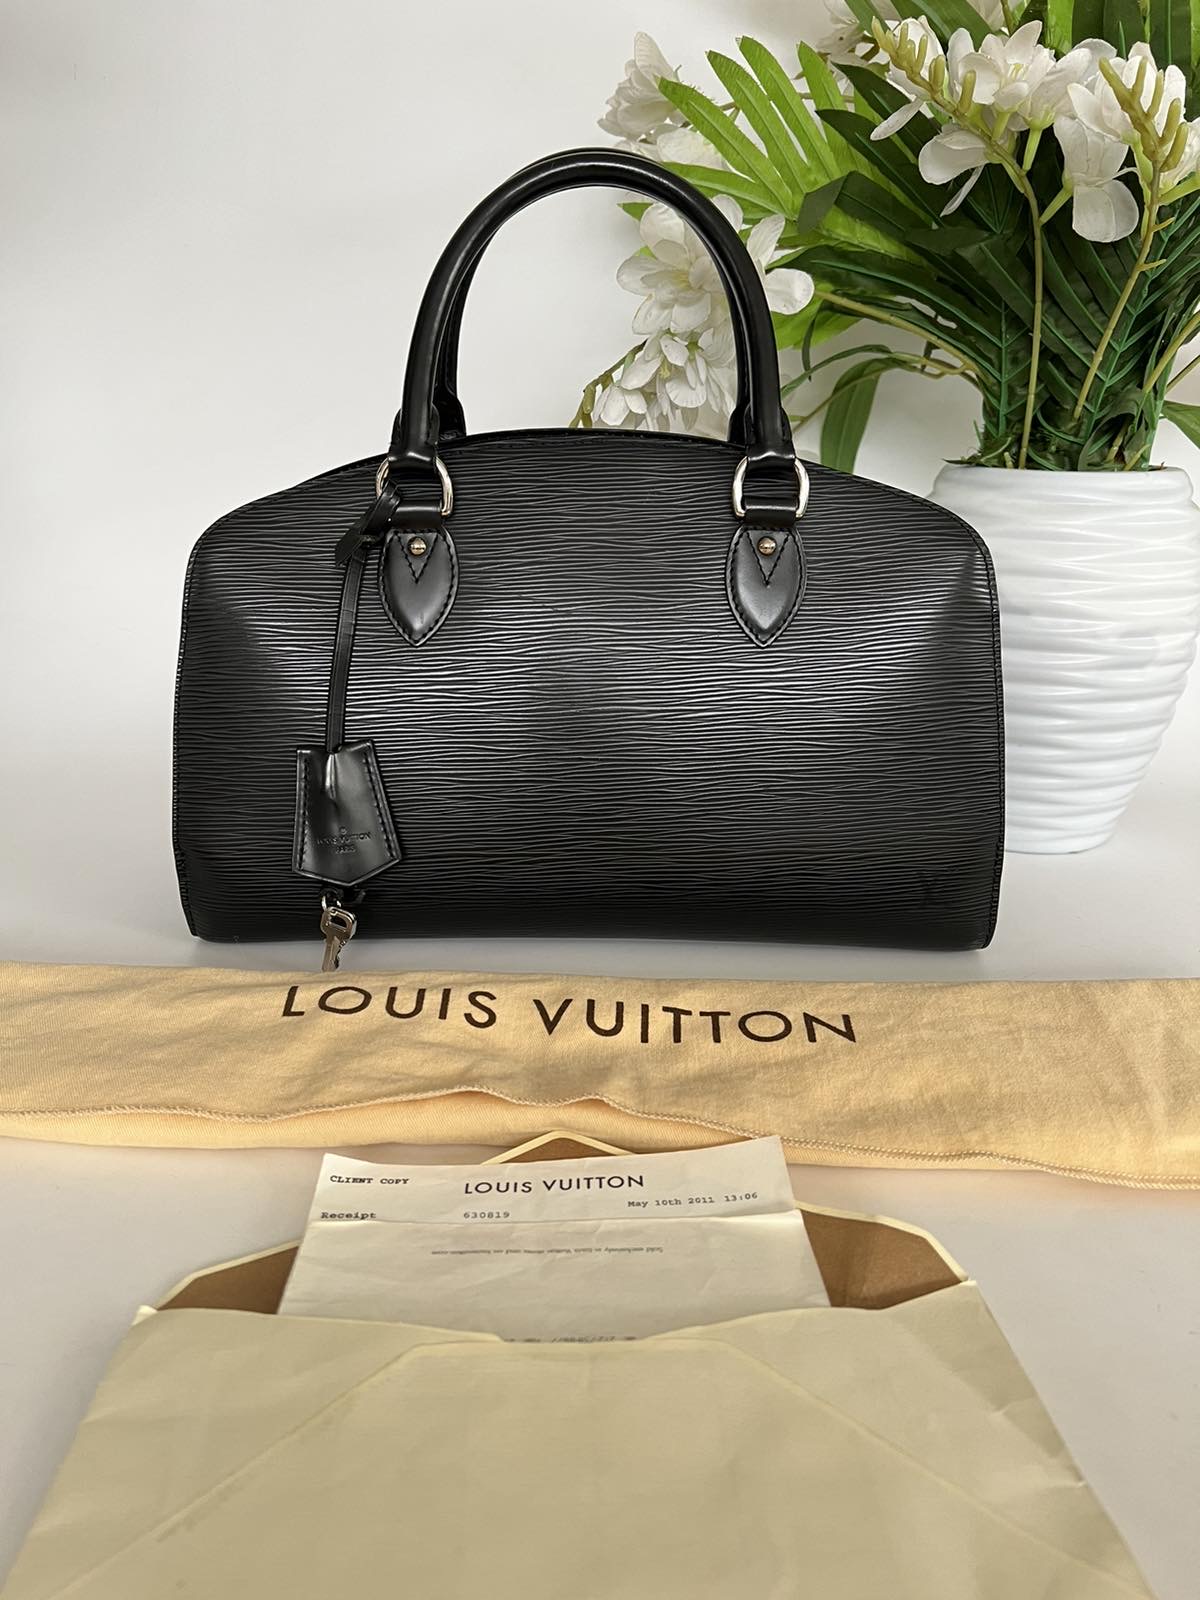 Louis Vuitton Epi Leather St. Jacques. Made in France., Luxury